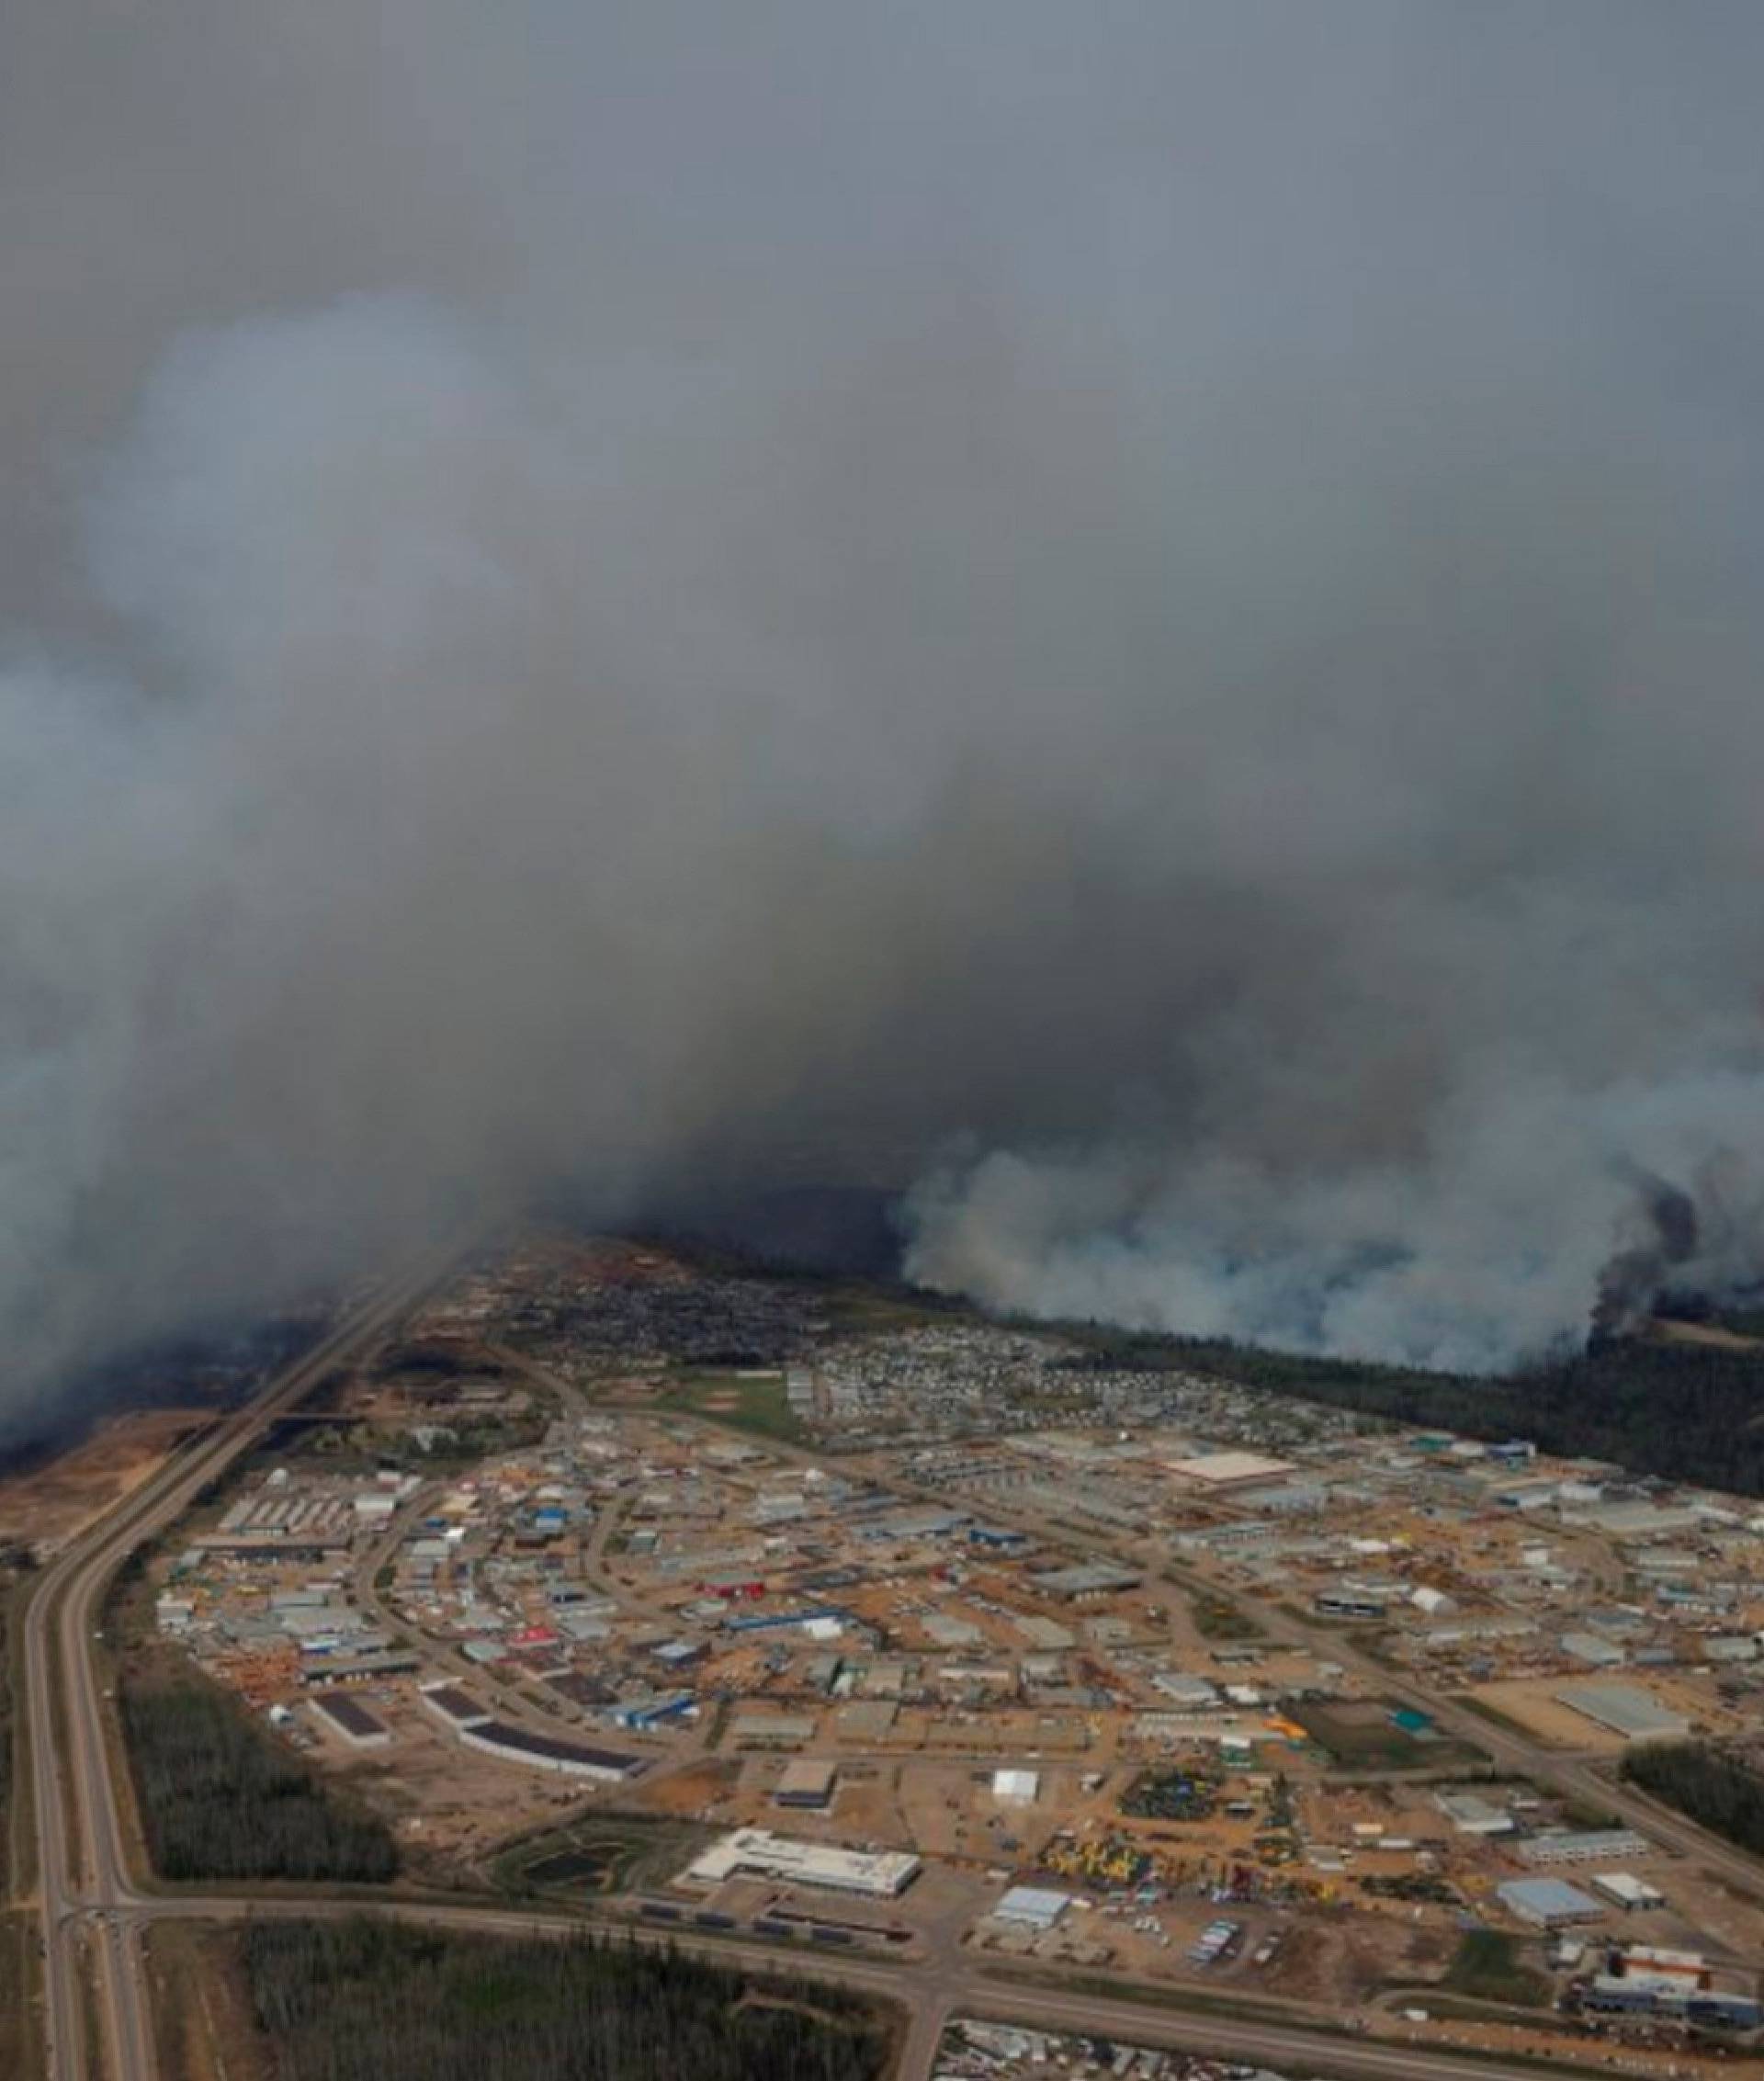 A Canadian Joint Operations Command aerial photo shows wildfires near neighborhoods in Fort McMurray Alberta Canada